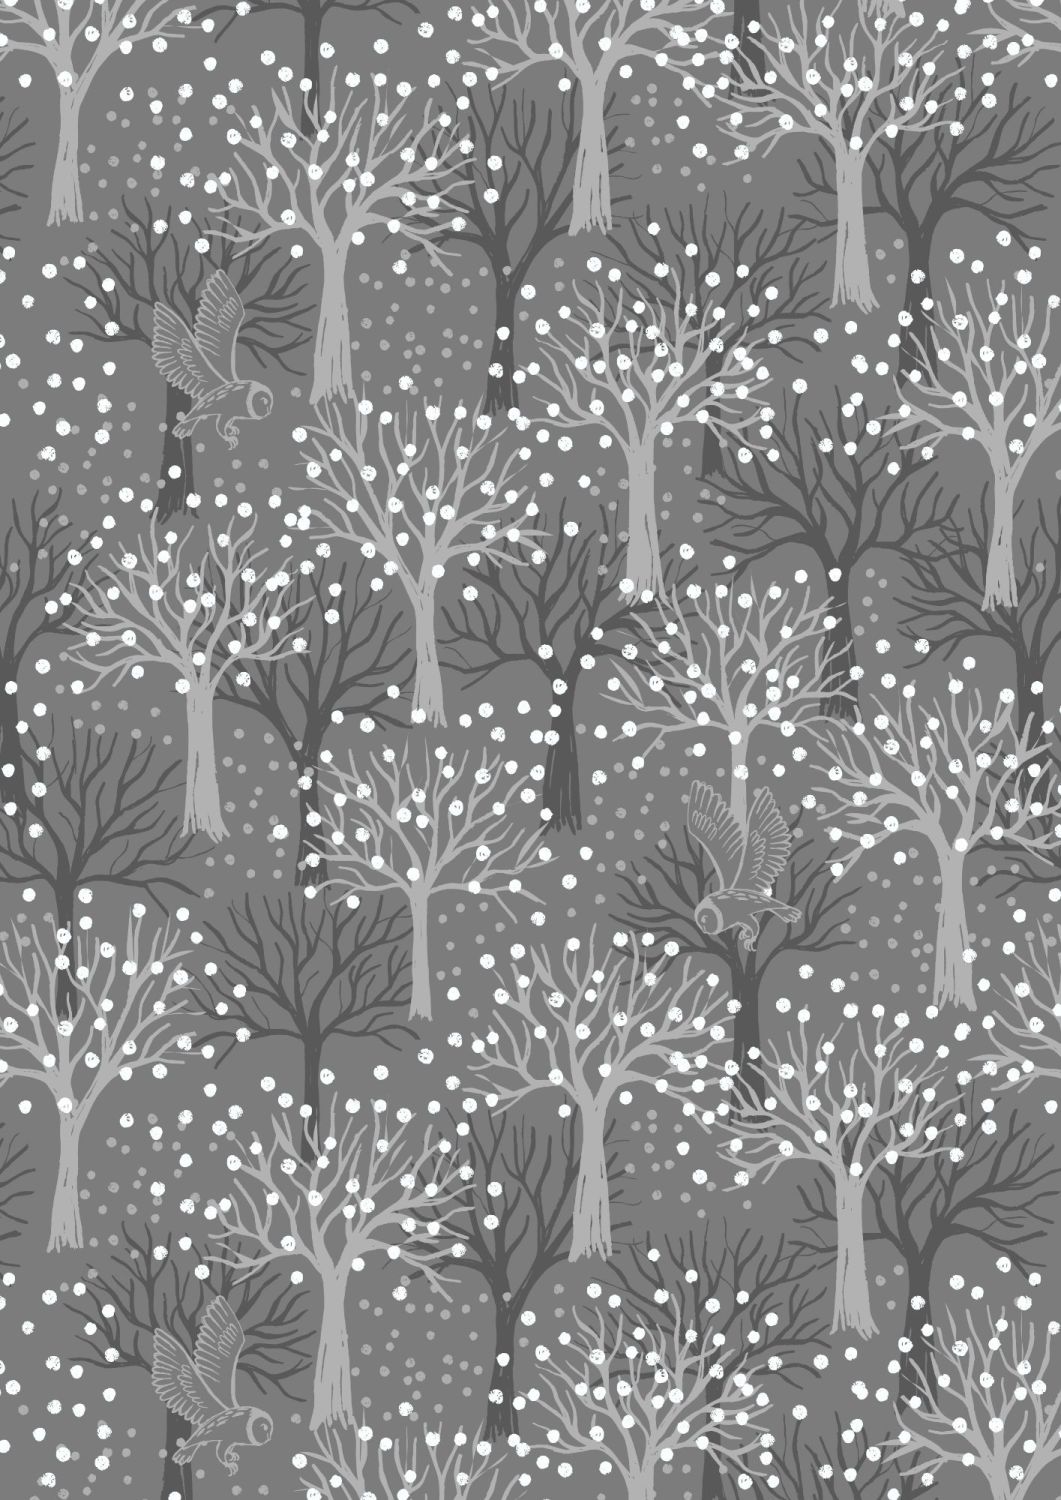 Lewis and Irene - Secret Winter Garden - Owl Orchard on Dark Grey with Pear